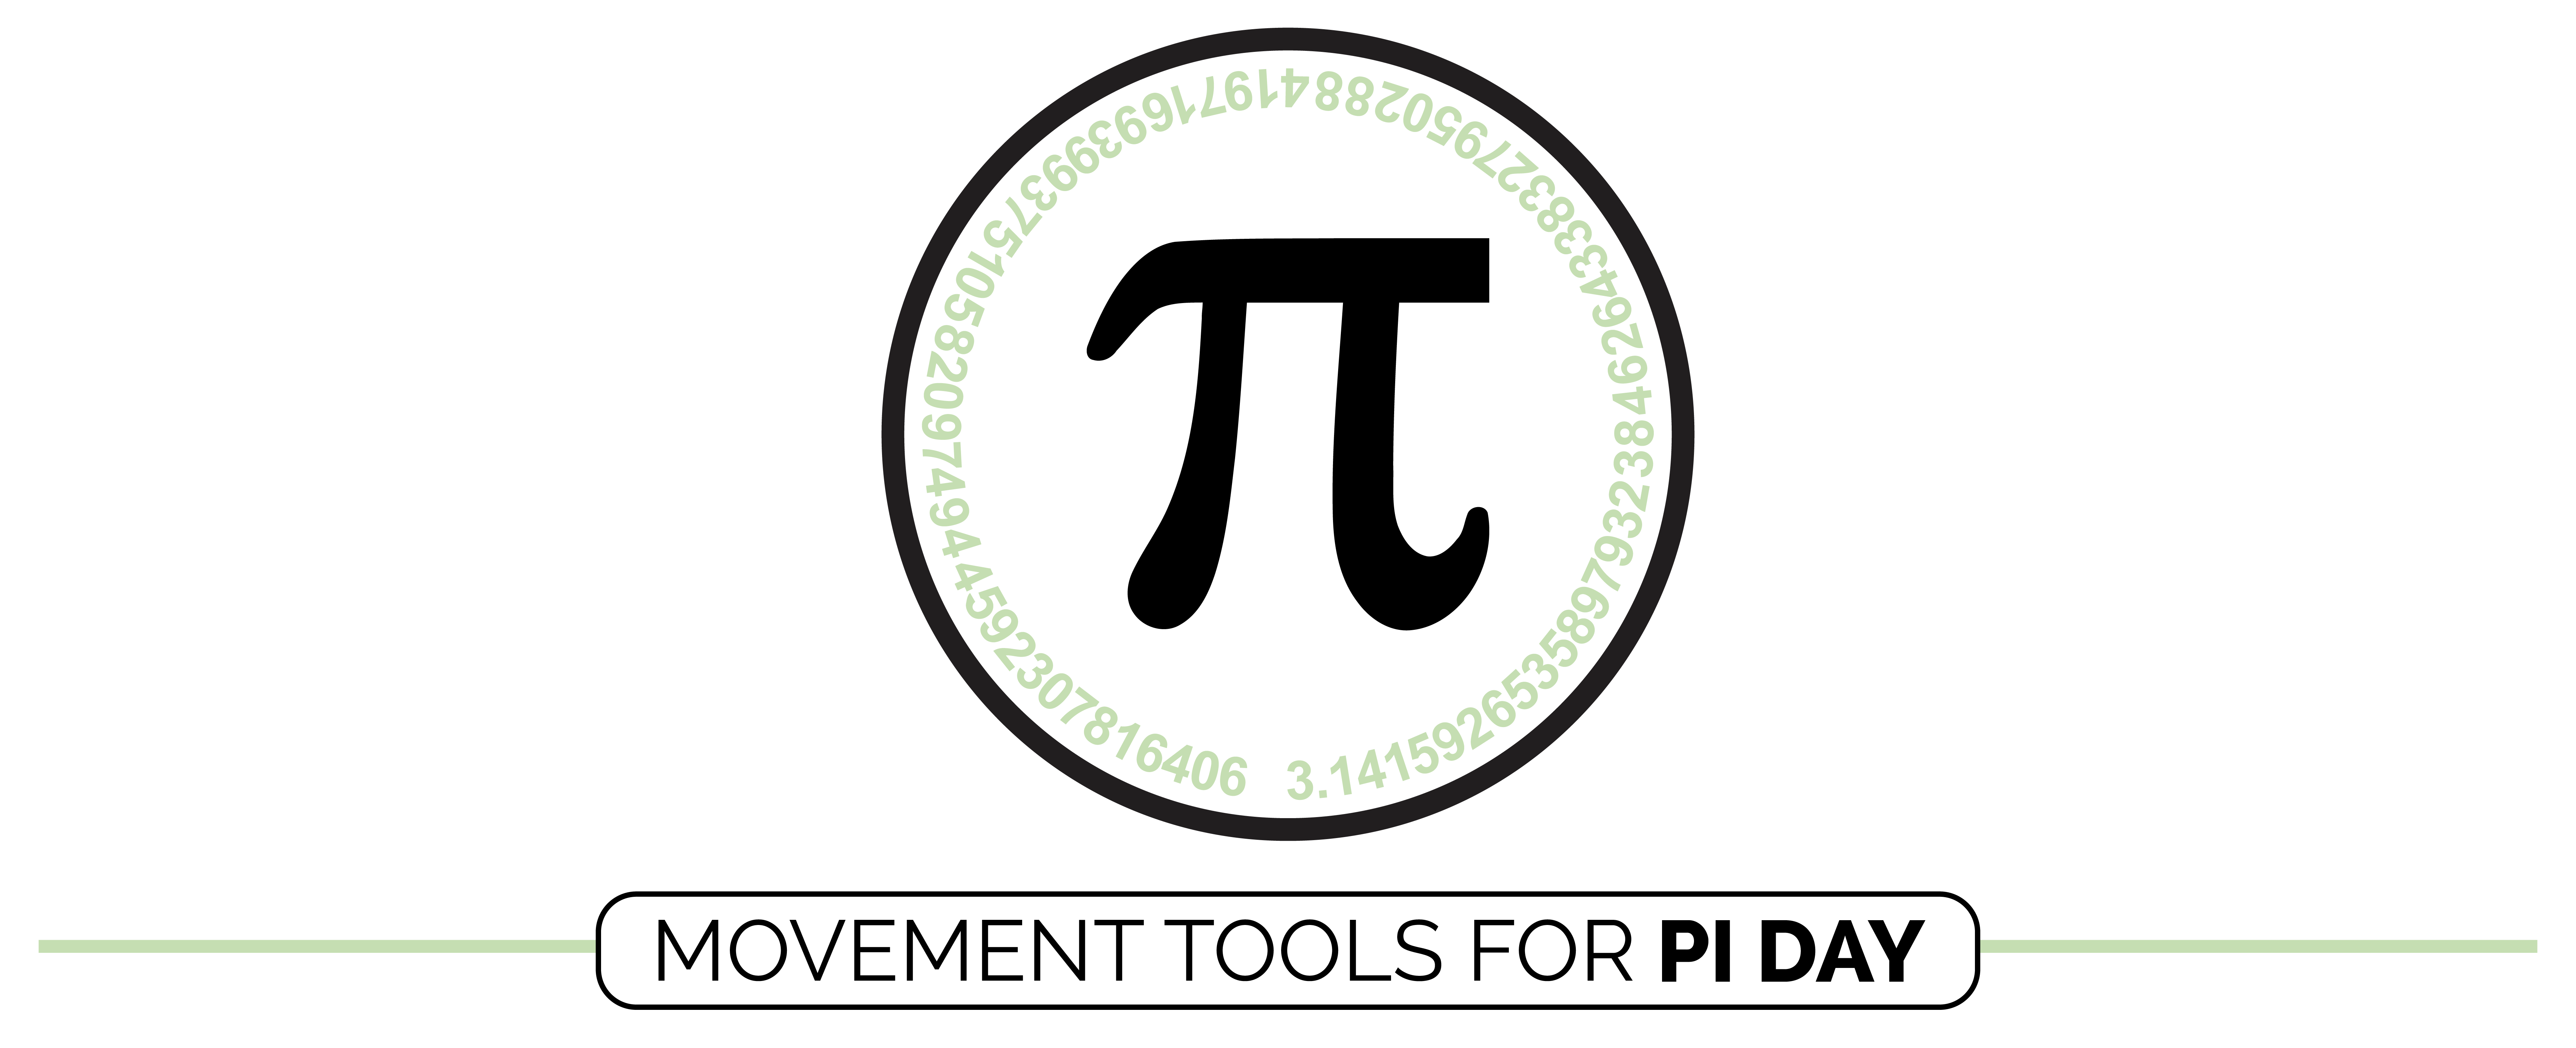 Pi Day Feature Image